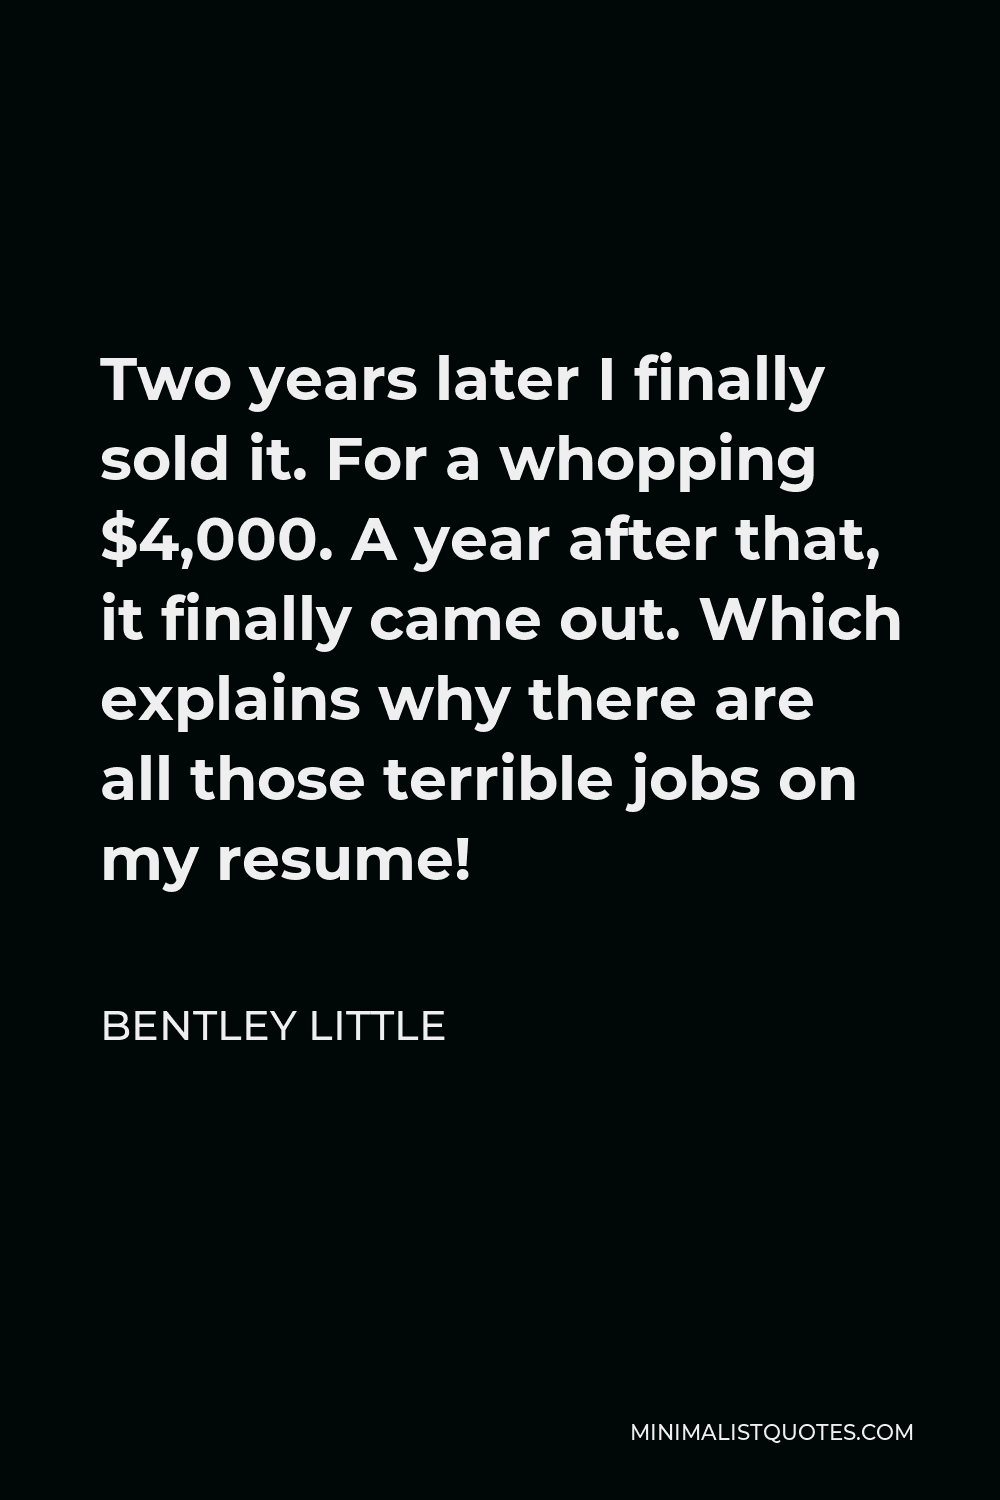 Bentley Little Quote - Two years later I finally sold it. For a whopping $4,000. A year after that, it finally came out. Which explains why there are all those terrible jobs on my resume!